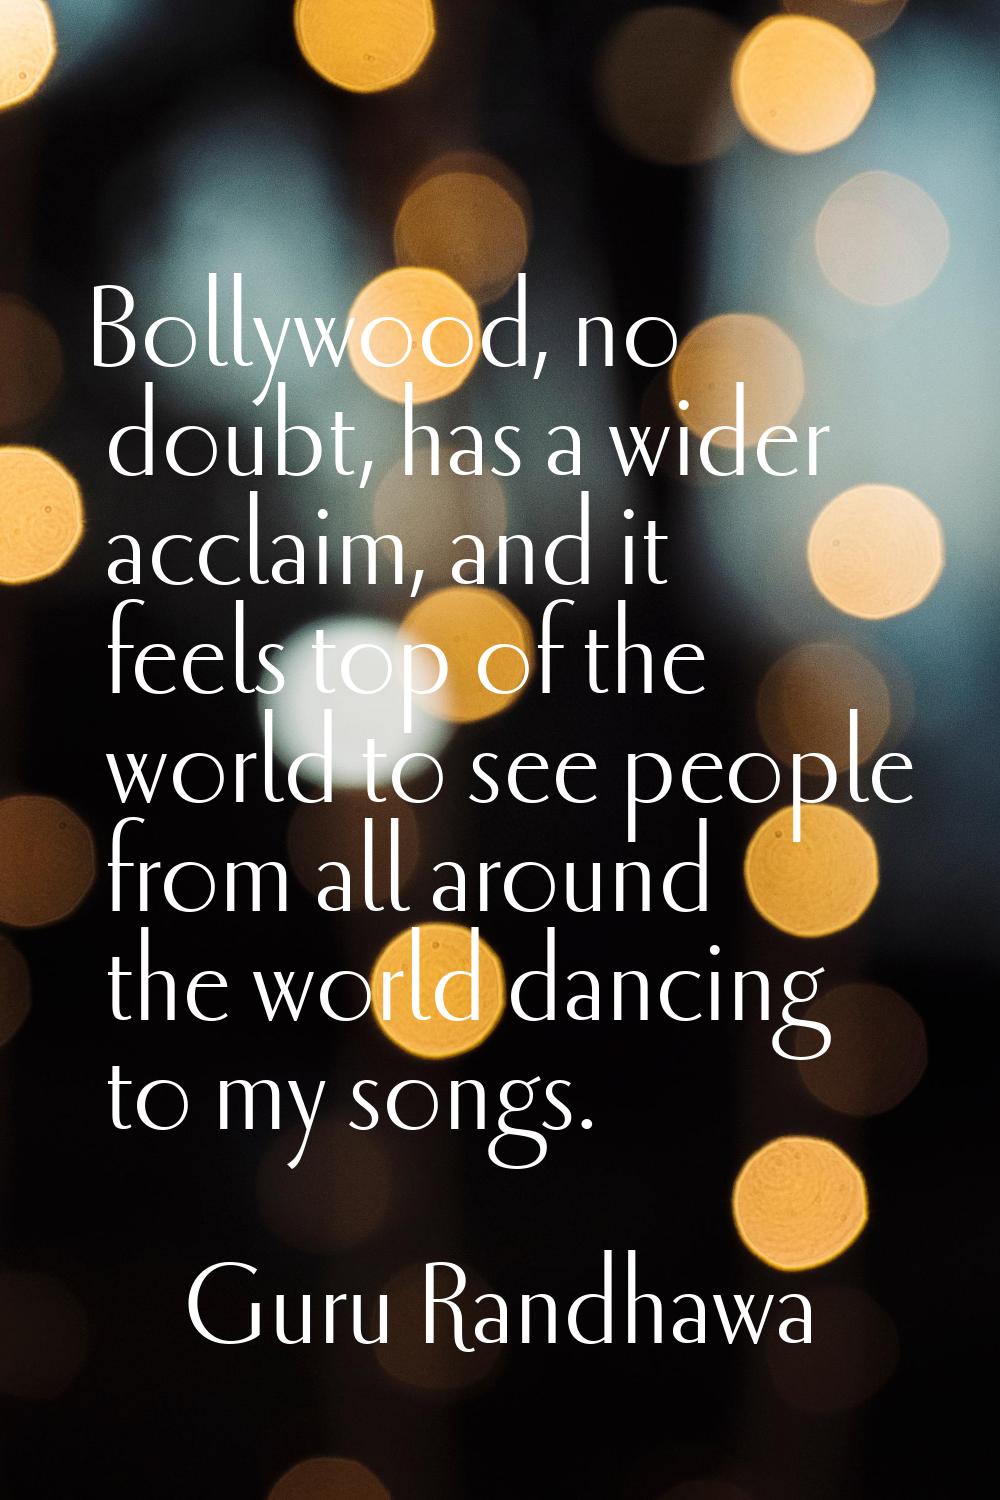 Bollywood, no doubt, has a wider acclaim, and it feels top of the world to see people from all arou